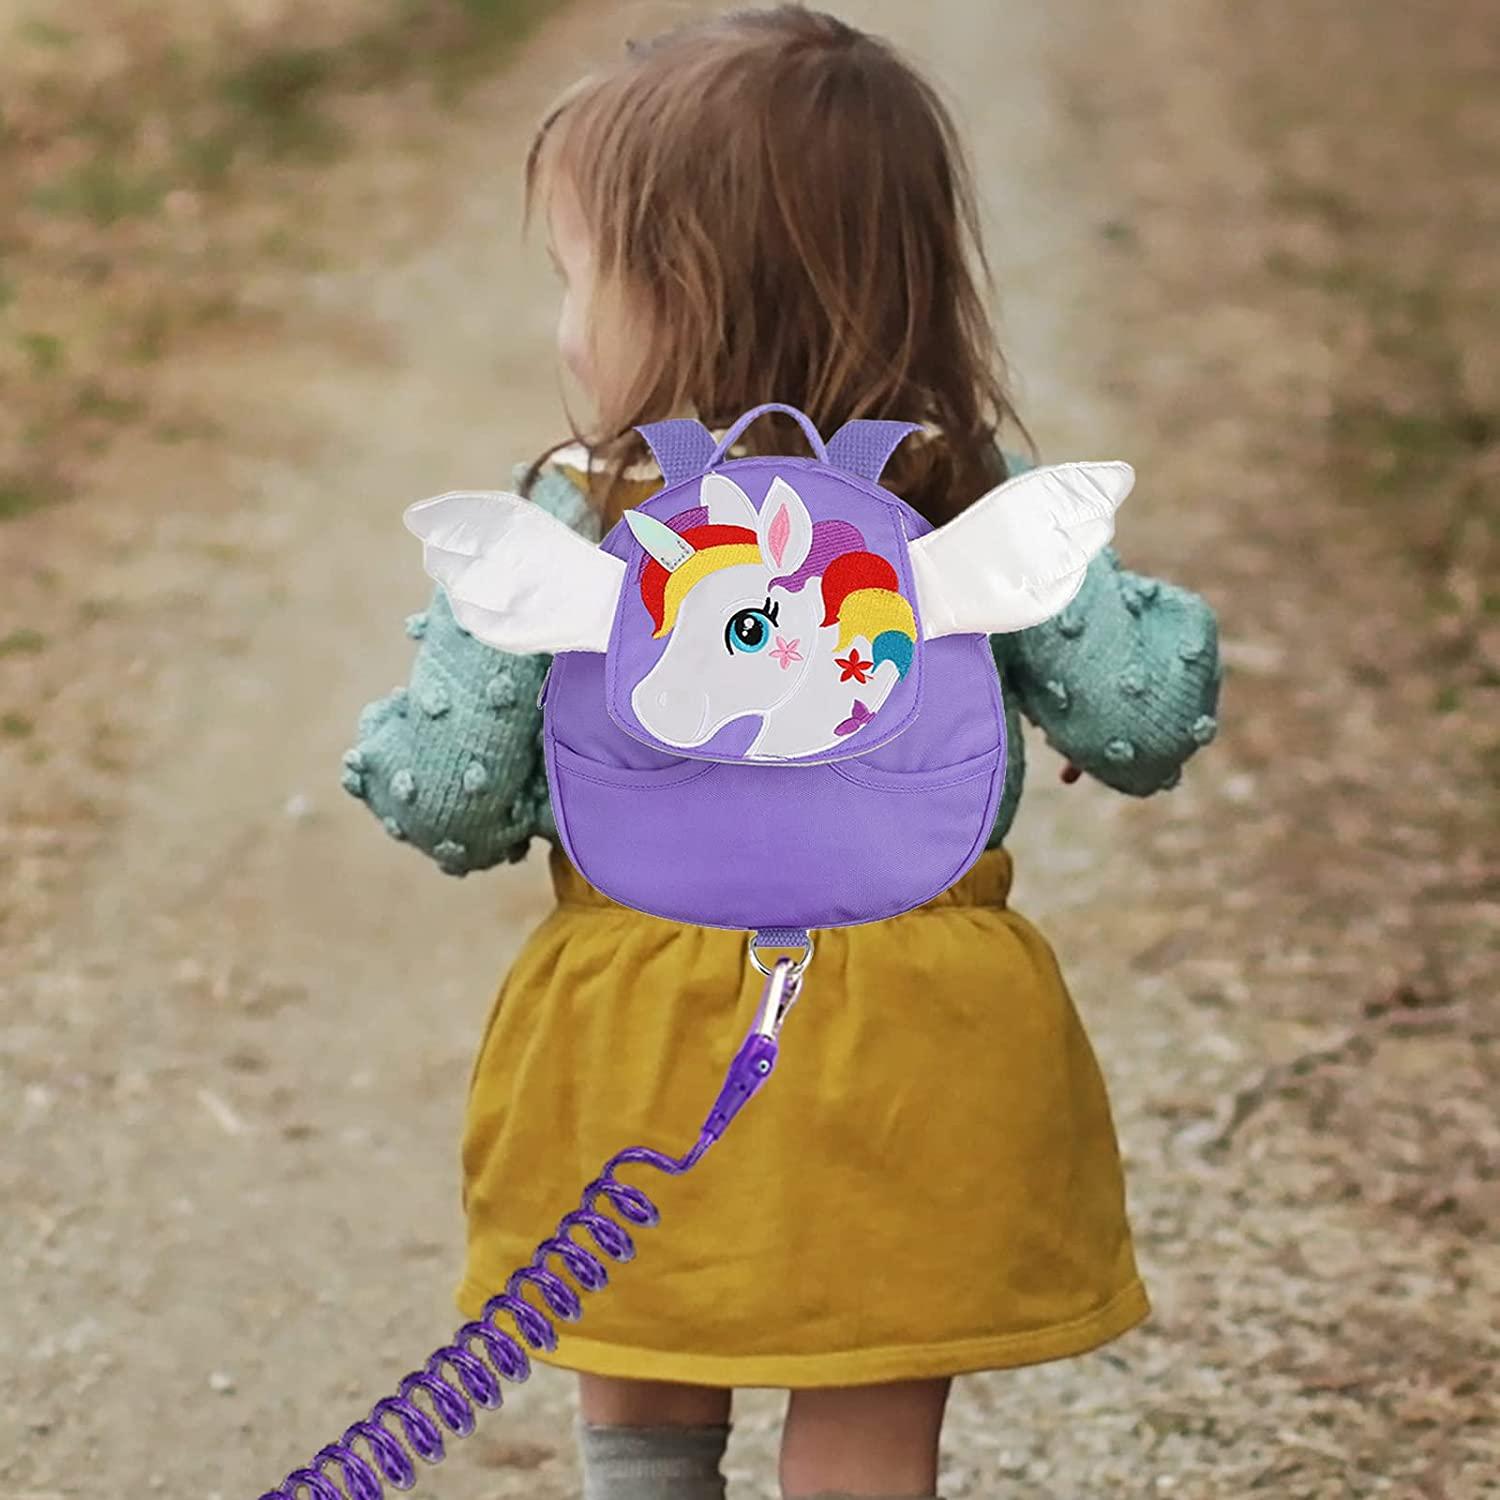 Accmor Toddler Harness Backpack Leash Baby Dinosaur Backpacks with